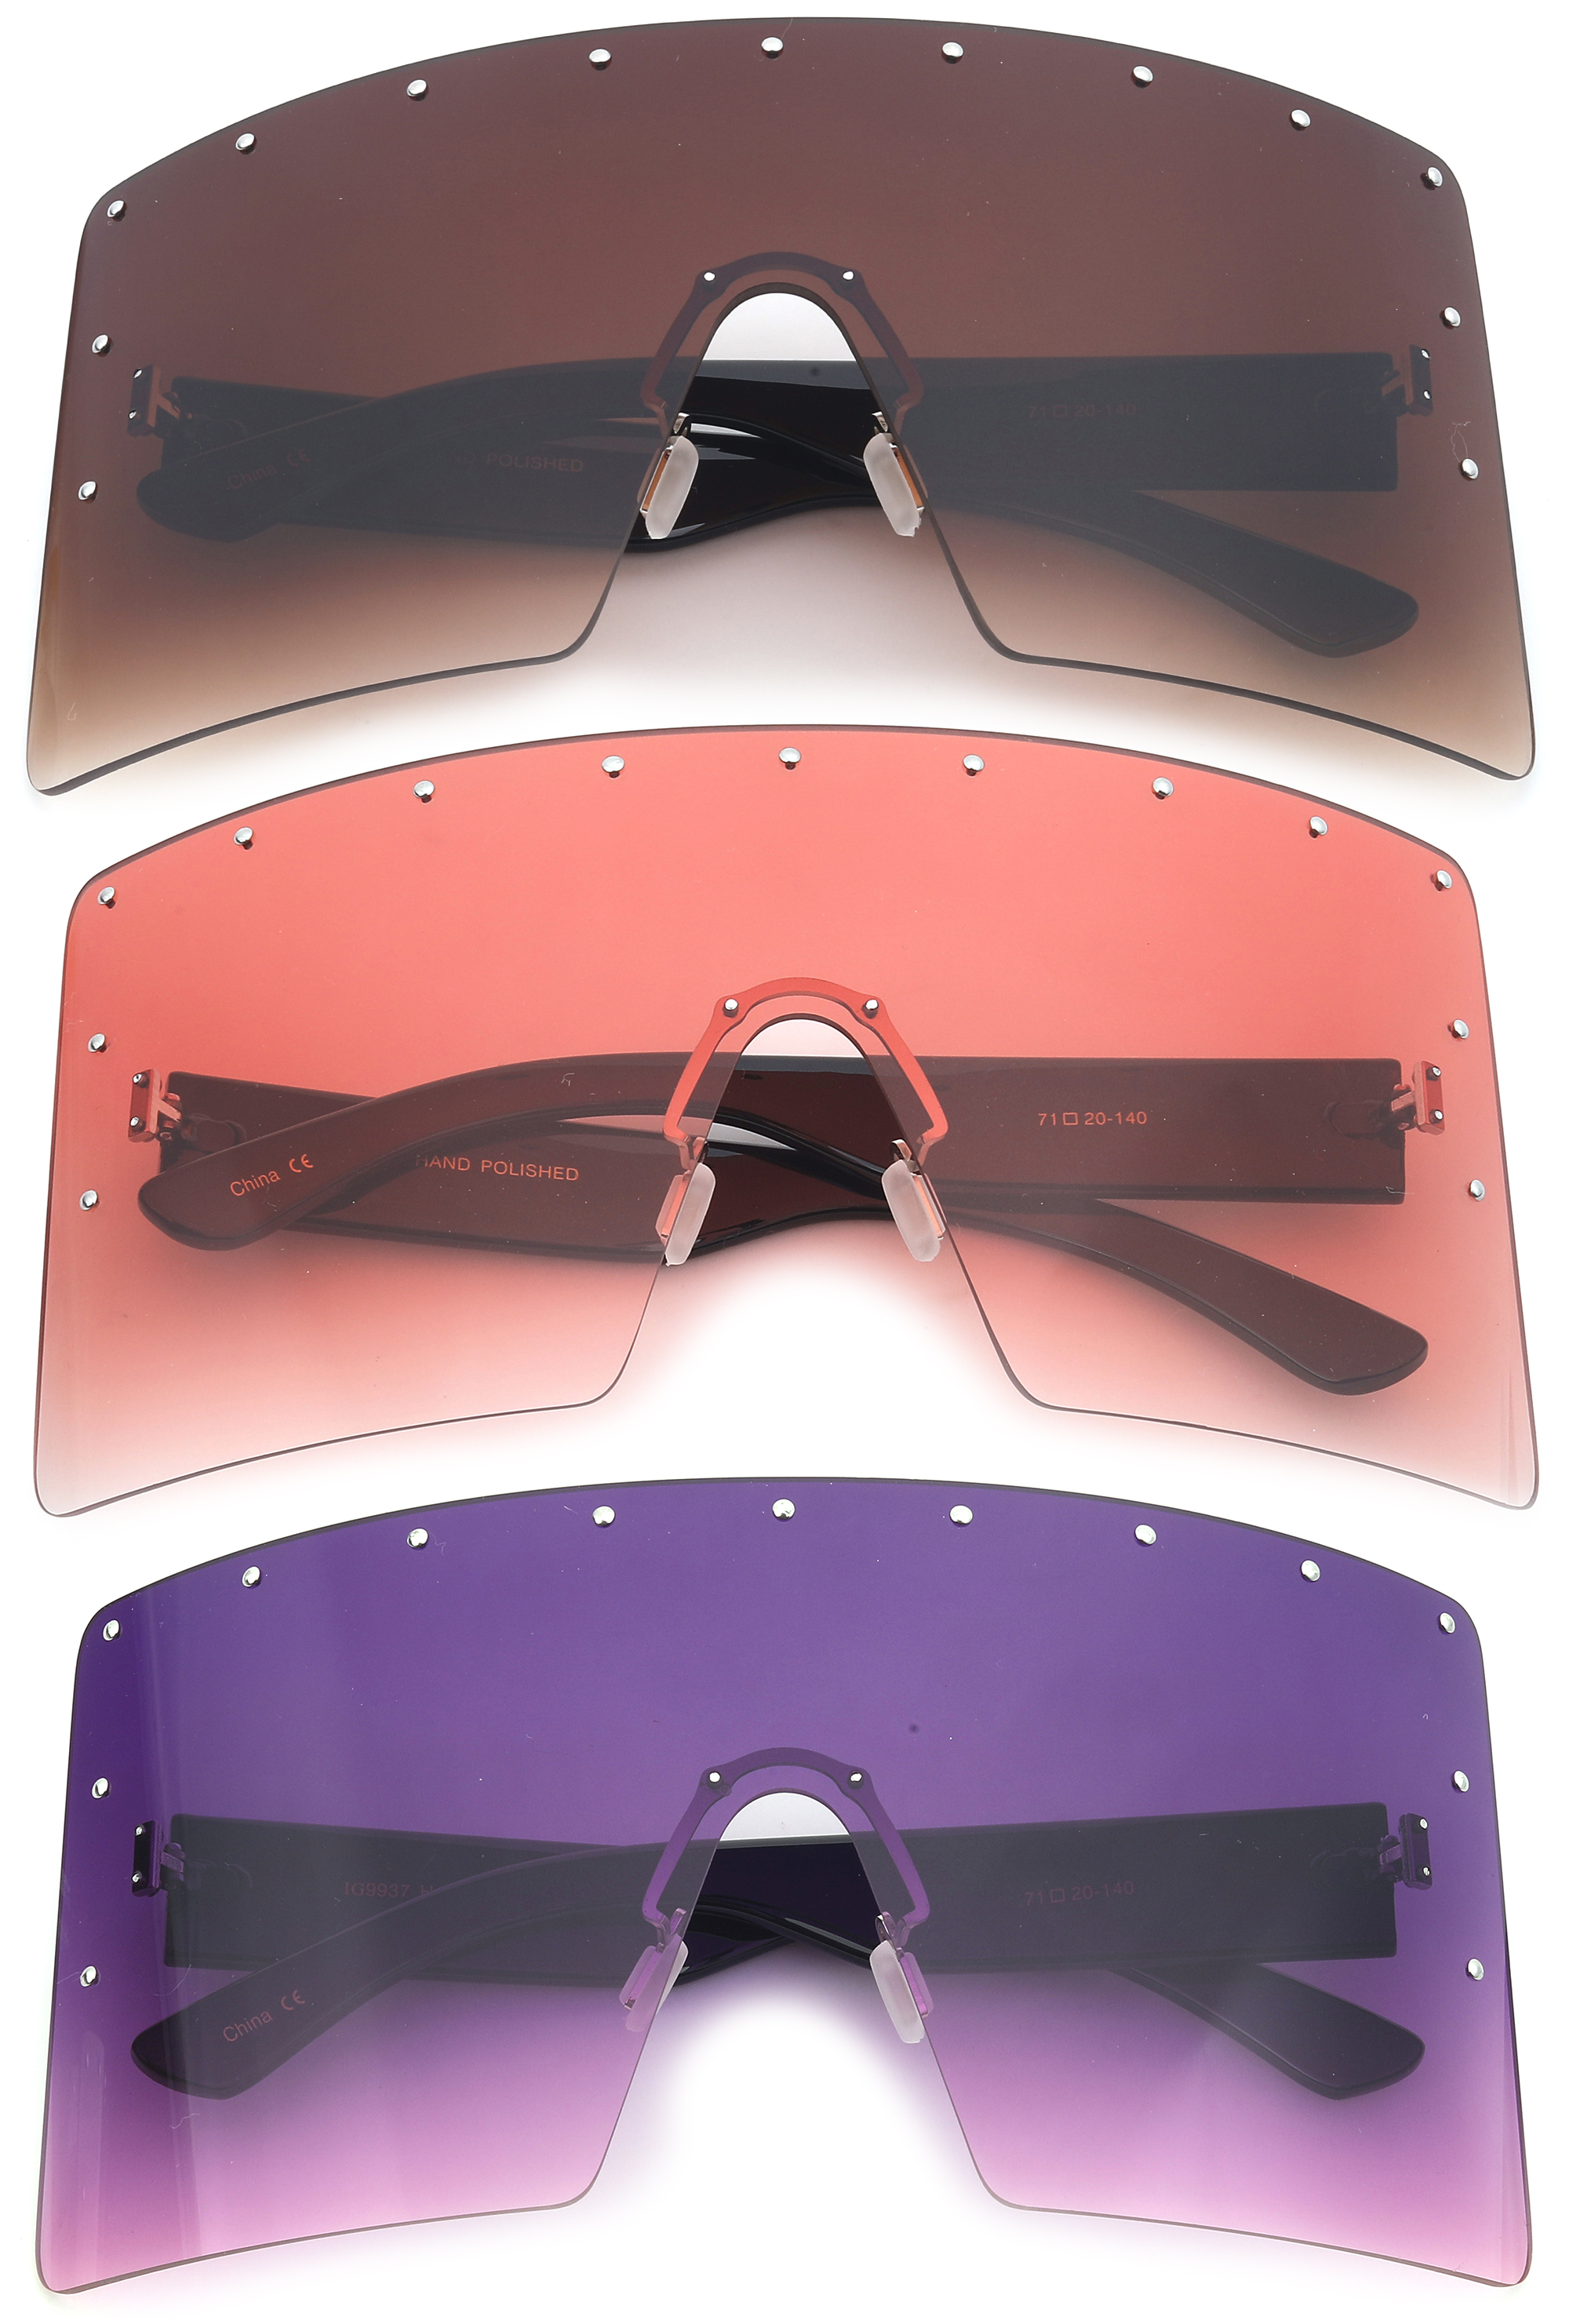 3 Pairs Newbee Fashion One Piece Lens Oversized Square Rimless Large Fashion Sunglasses for Women, 7*3.25 inches Rectangle Flat Top Face Shield, Pins Decorations, UV 400 Lens, Brown & Red & Purple - image 2 of 2